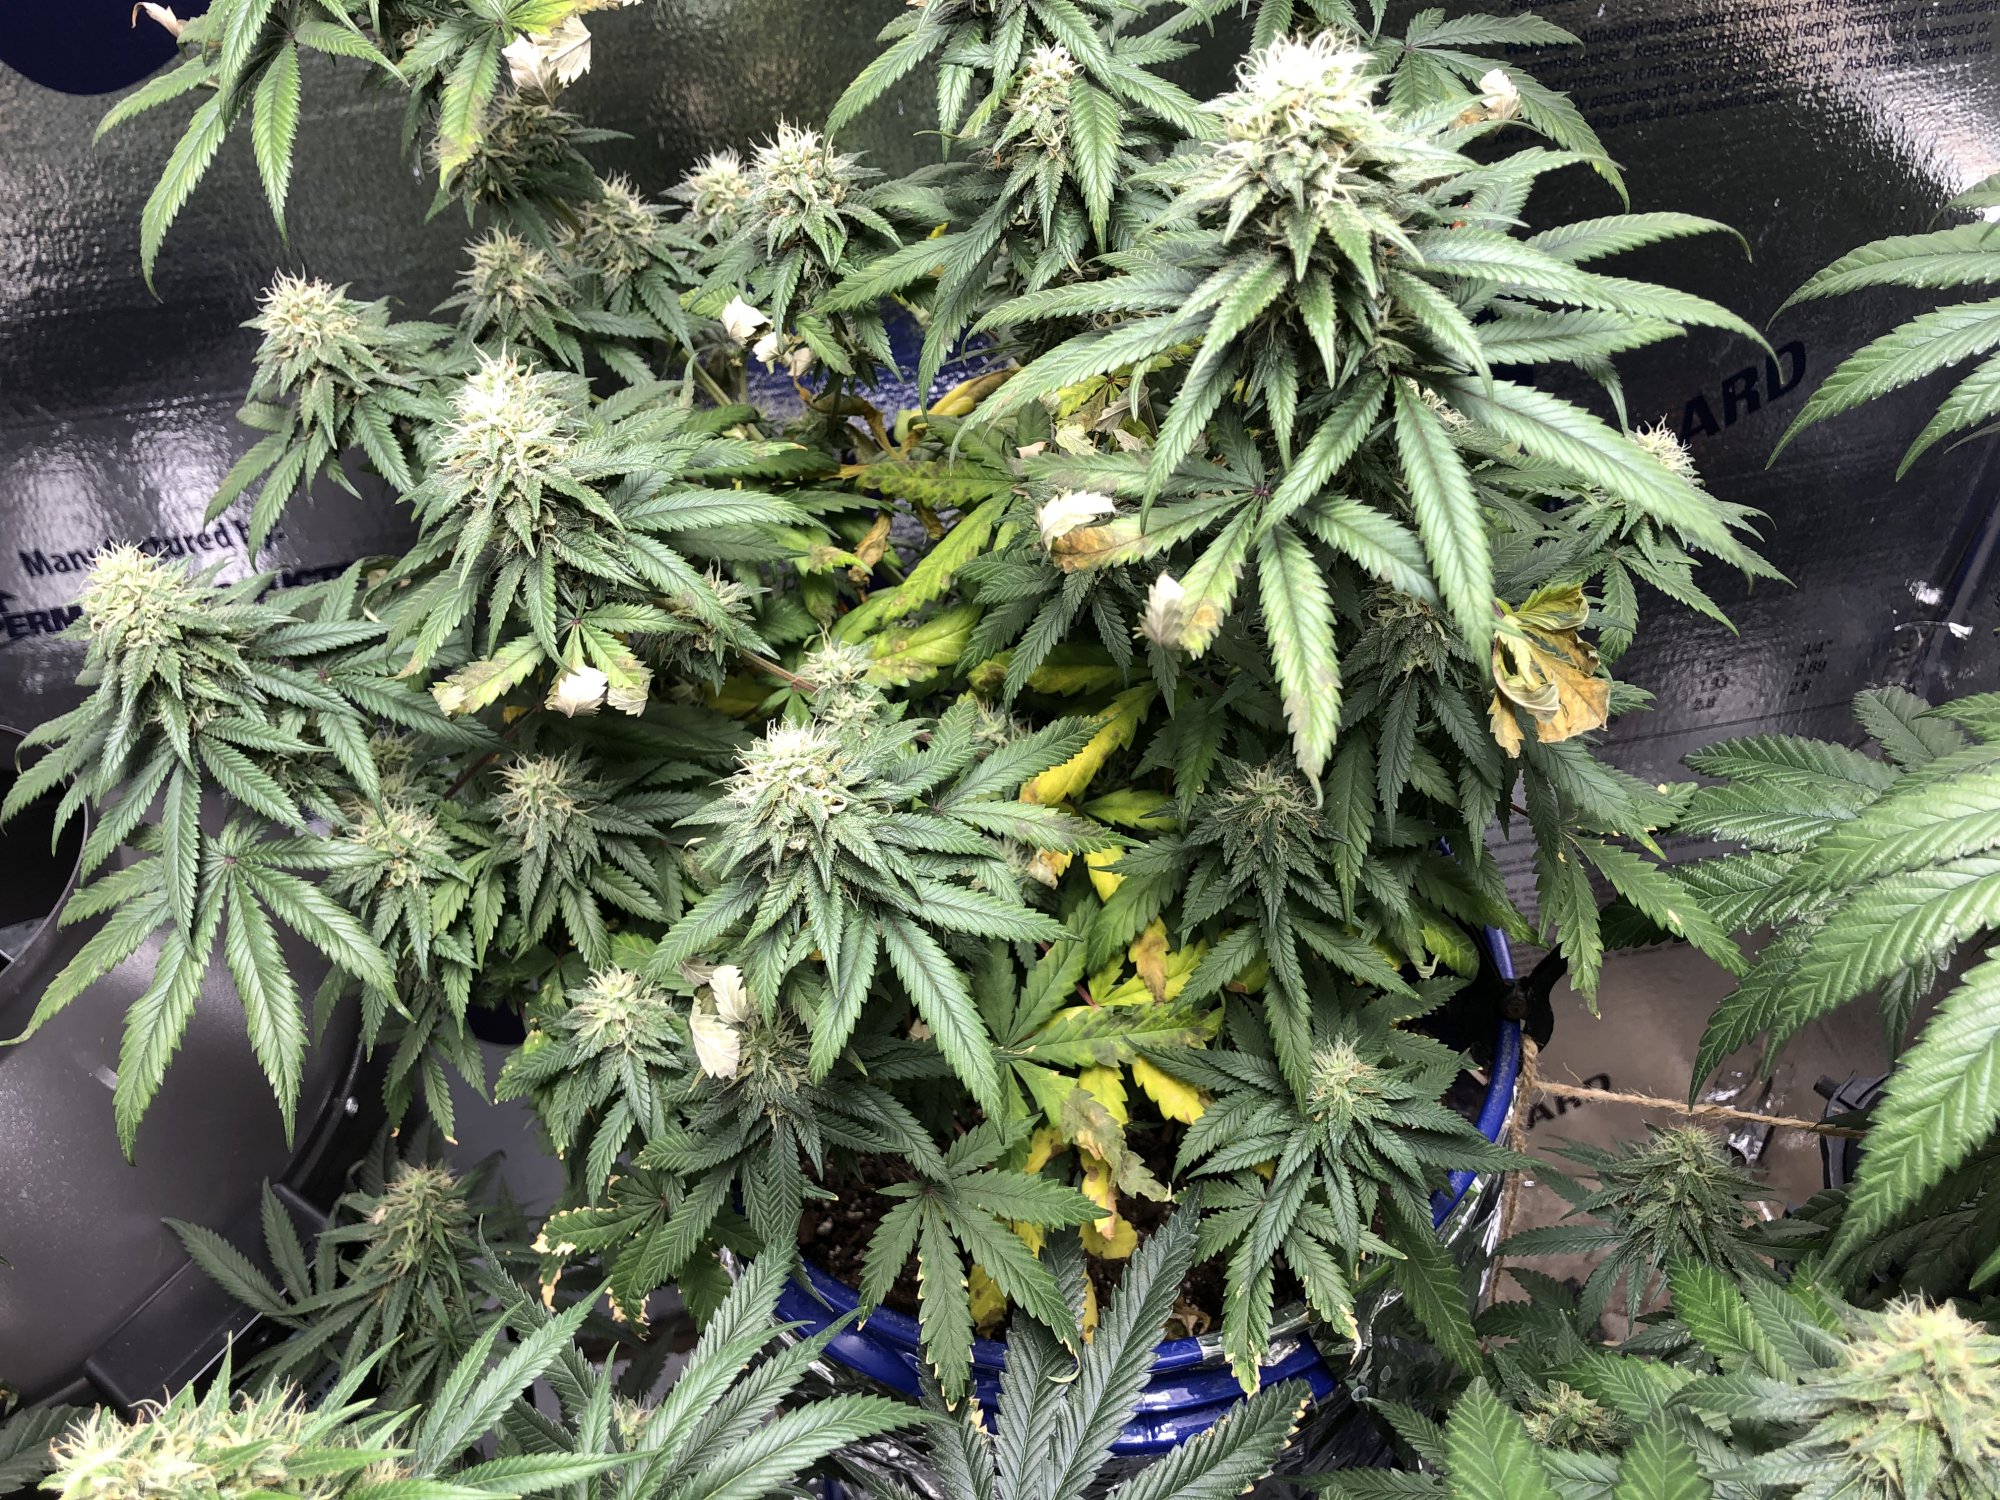 Day 48 flower w nutrient issues advice needed 5